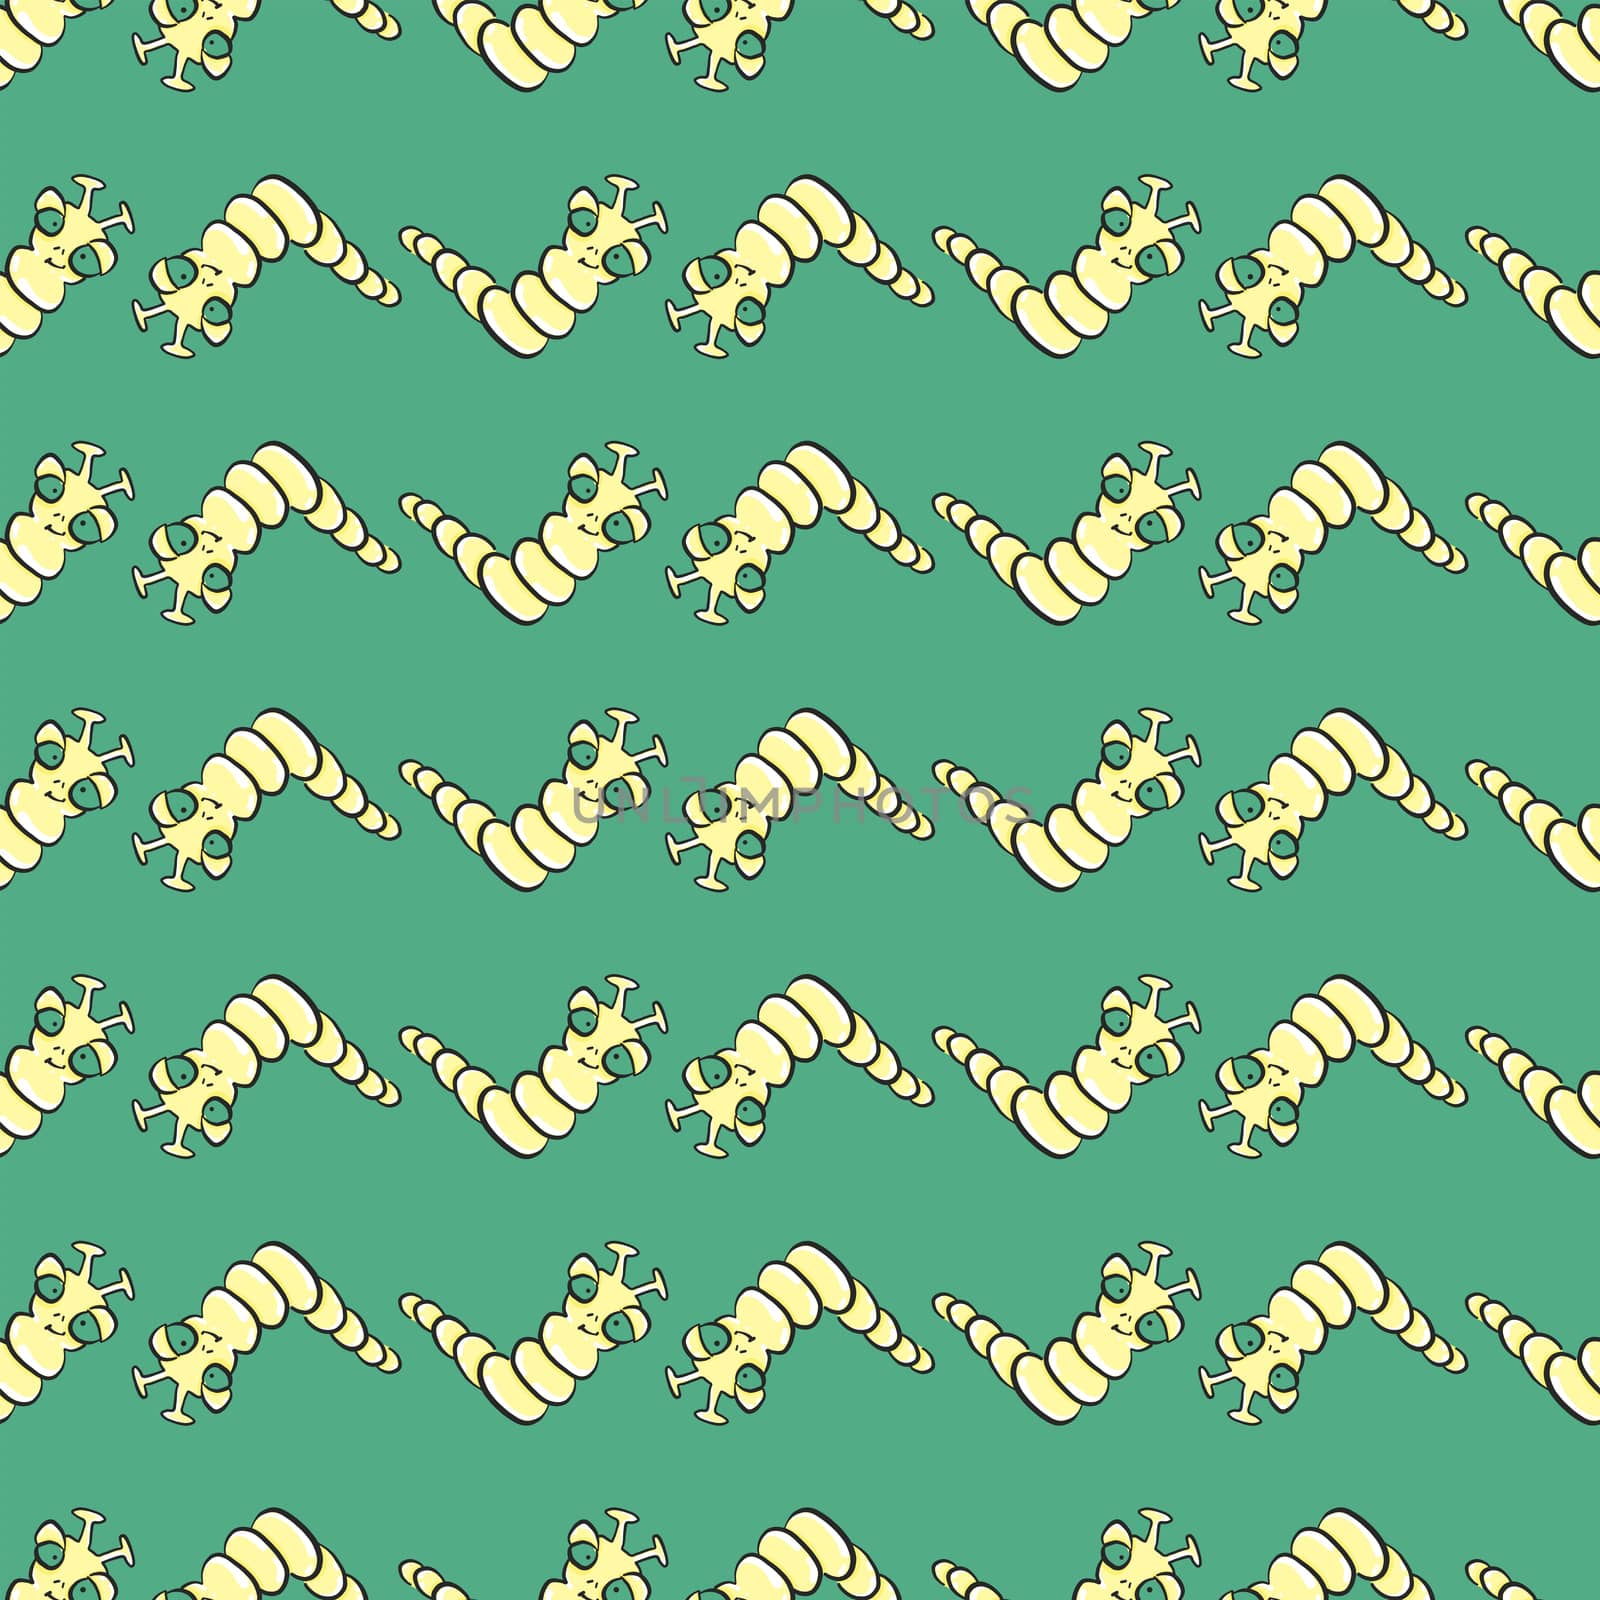 Worms pattern , illustration, vector on white background